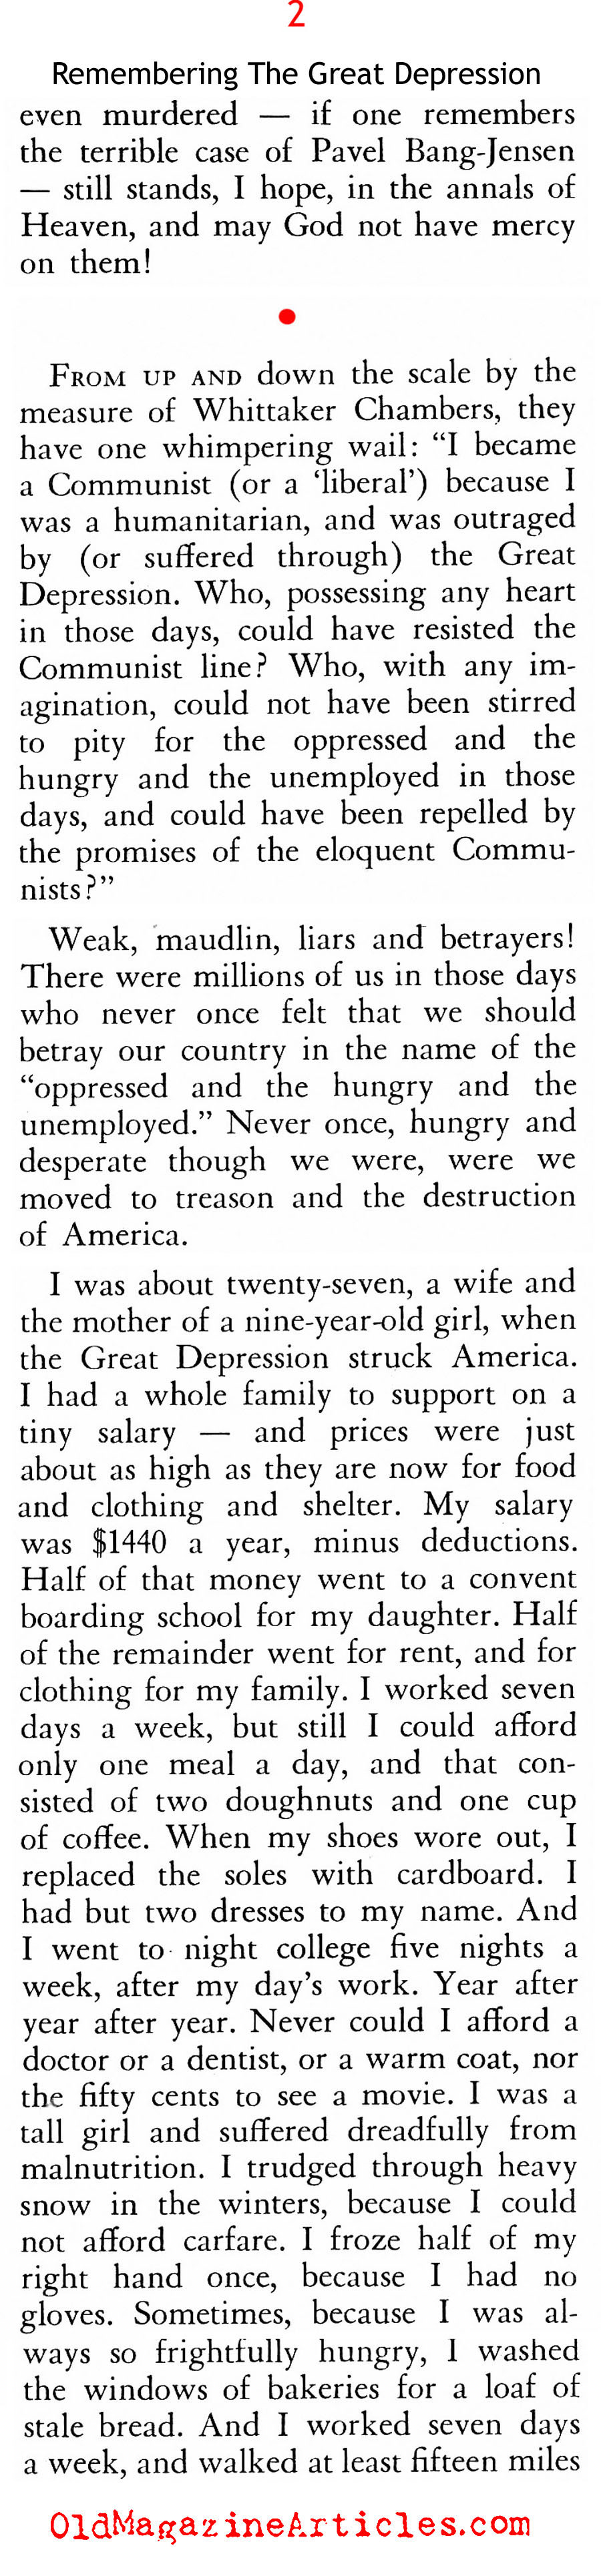 Rejecting Socialism During the Depression (American Opinion, 1963)